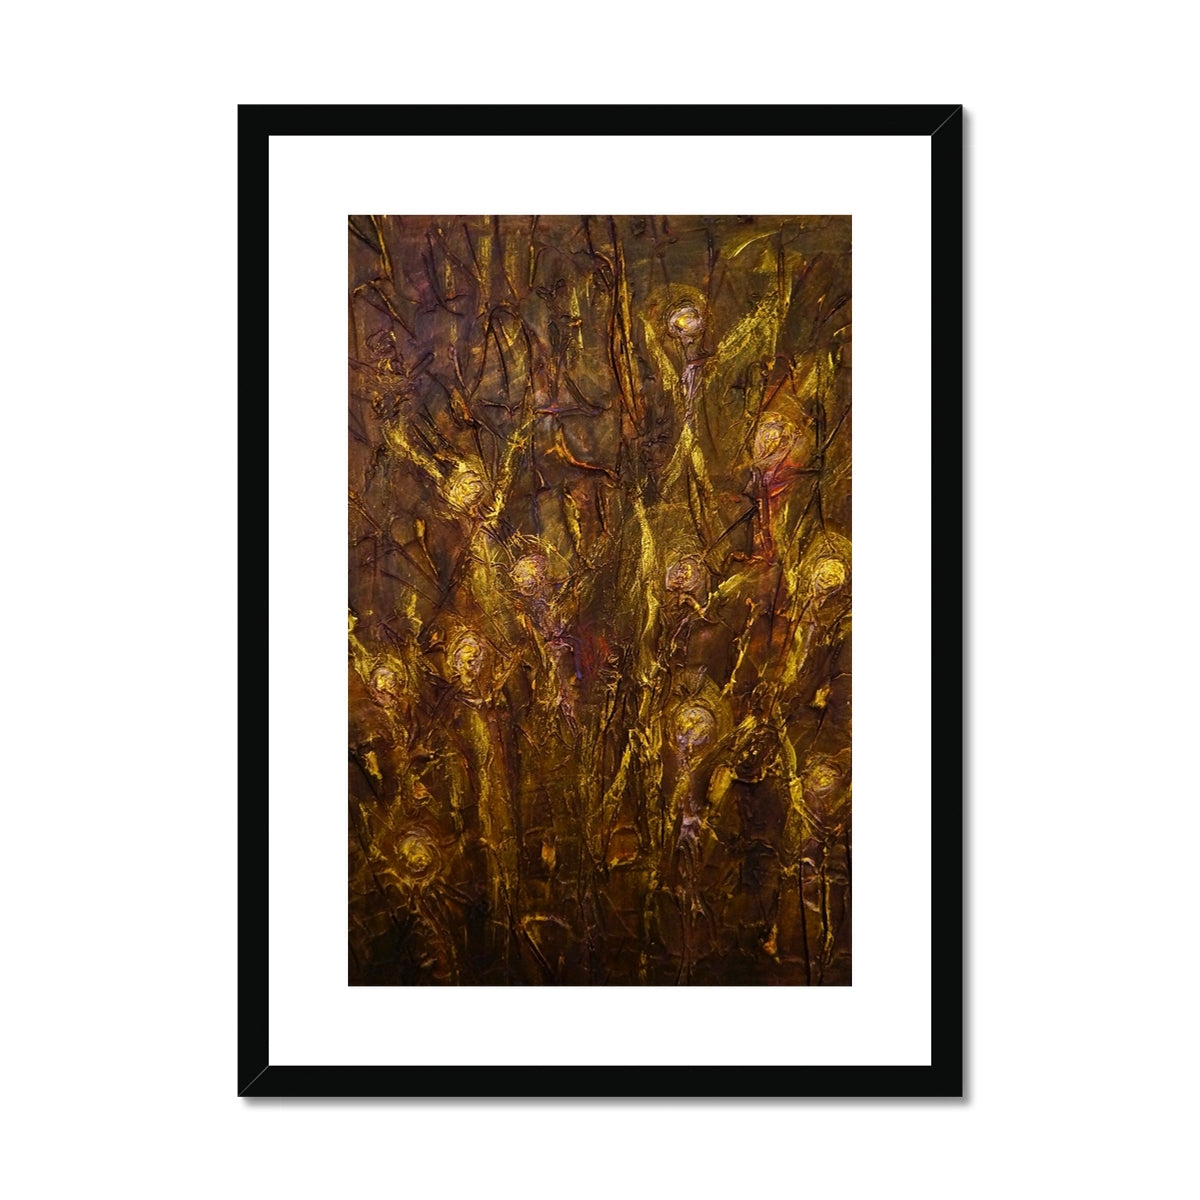 Tam O Shanter Witches Painting | Framed & Mounted Prints From Scotland-Framed & Mounted Prints-Abstract & Impressionistic Art Gallery-A2 Portrait-Black Frame-Paintings, Prints, Homeware, Art Gifts From Scotland By Scottish Artist Kevin Hunter